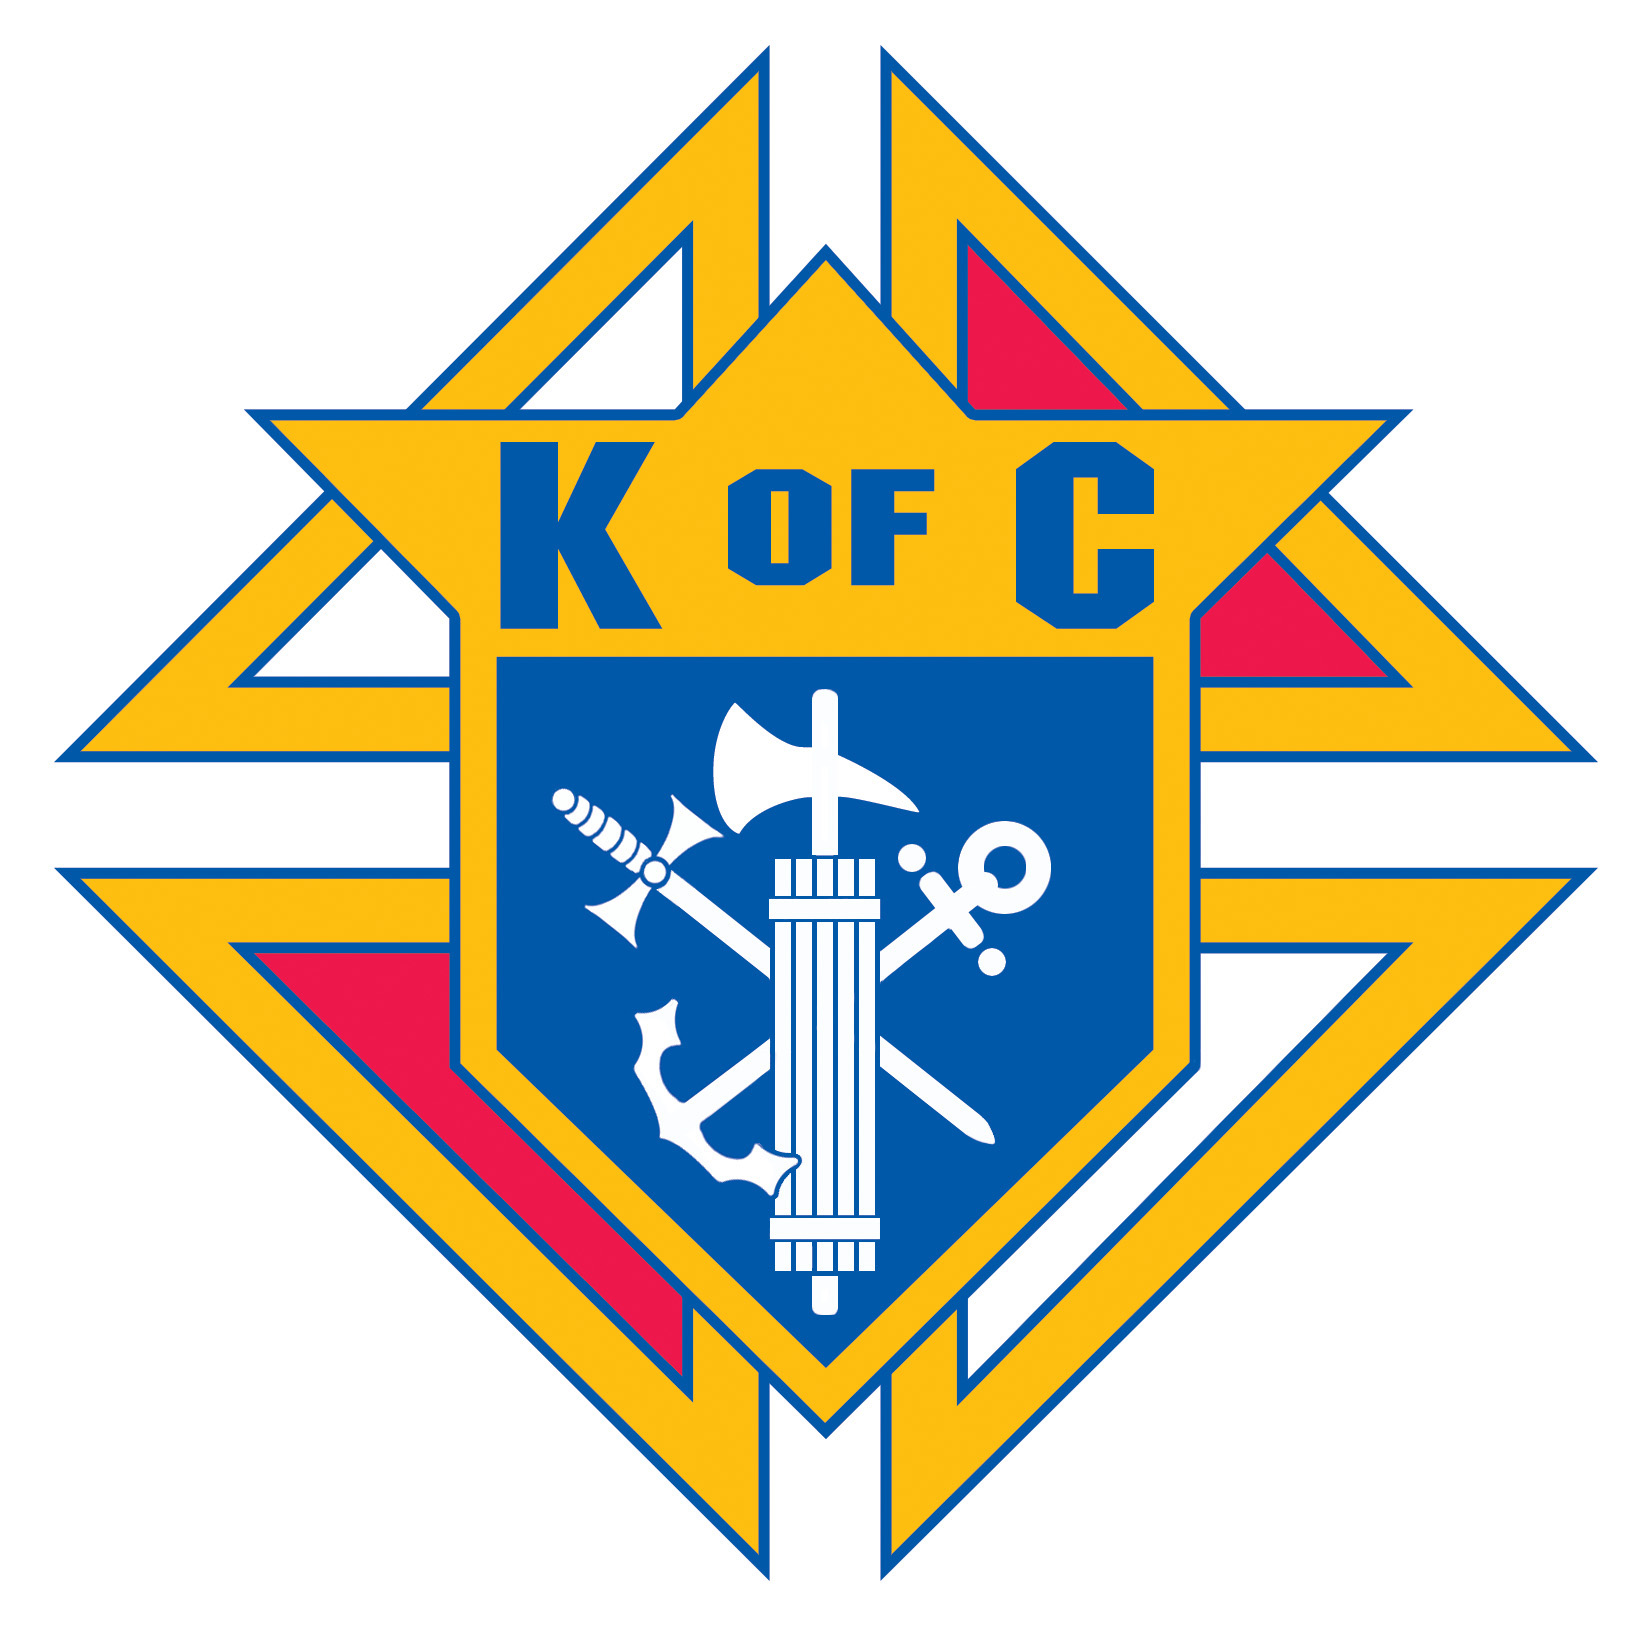 Knights of Columbus Coat of Arms. It depicts a golden shield with a blue centre. In the centre there is a bundle of wooden rods with an axe, a sword and an anchor.